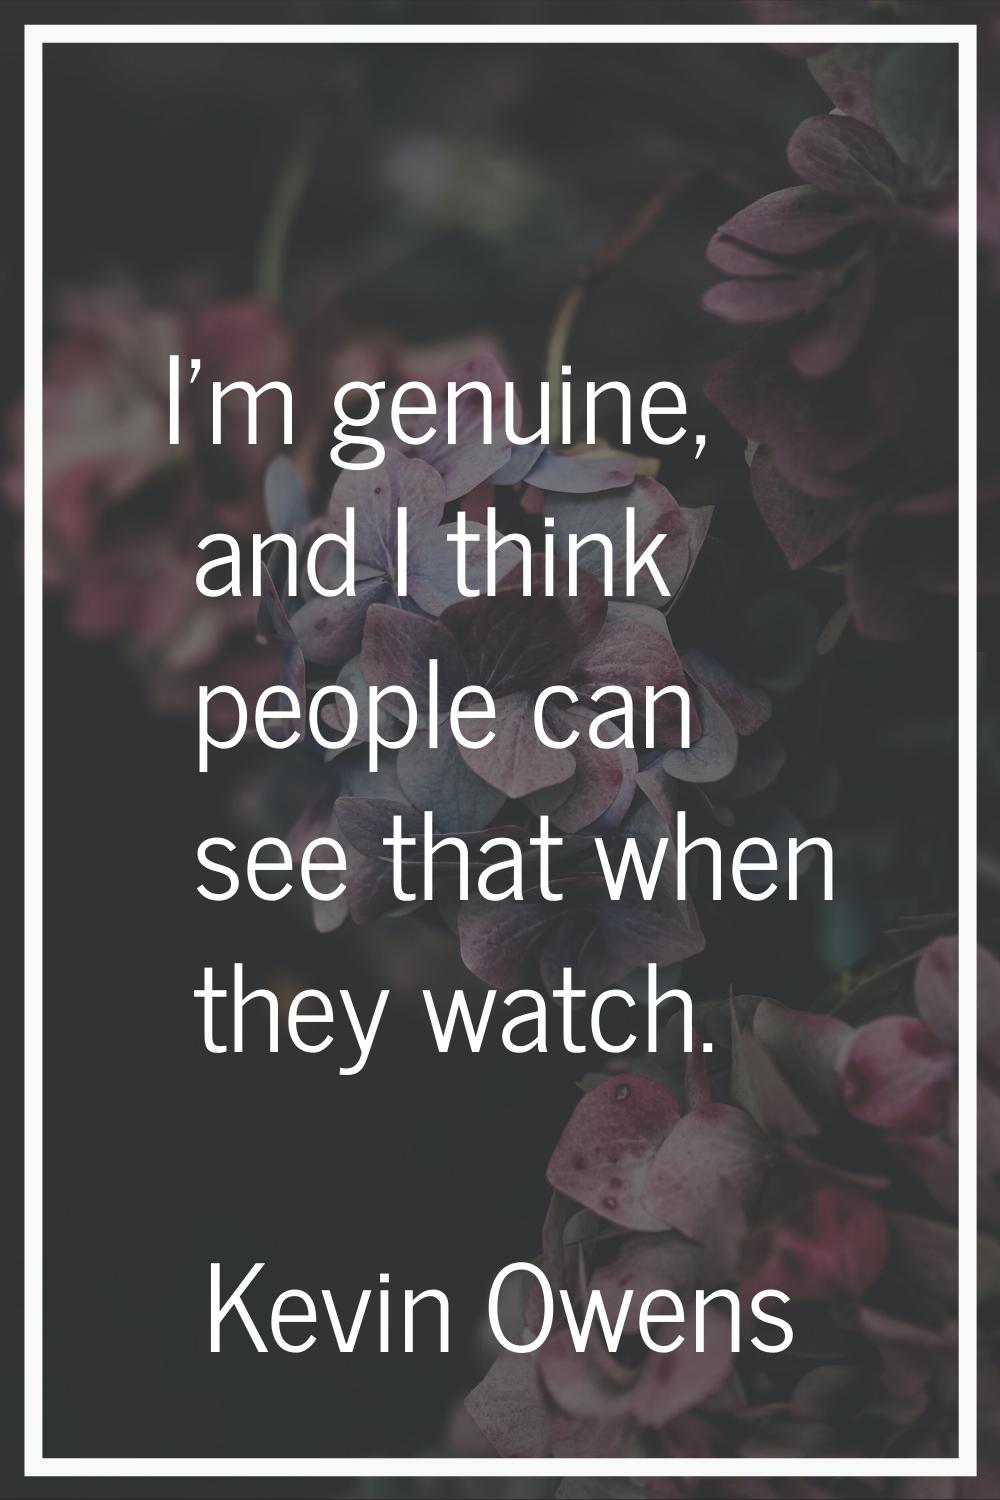 I'm genuine, and I think people can see that when they watch.